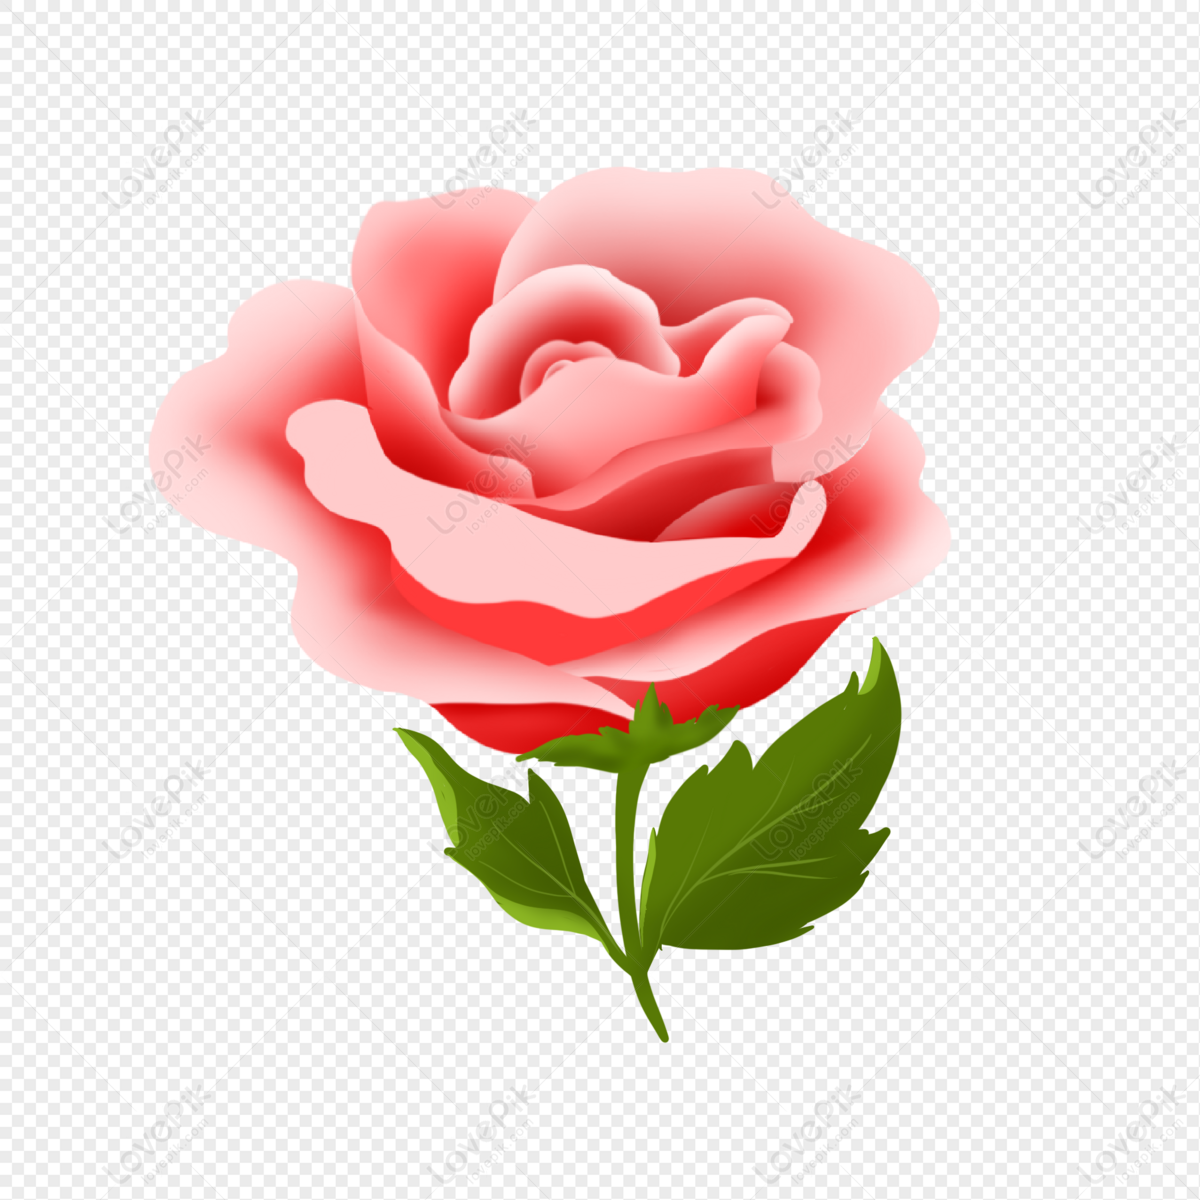 Blooming Pink Rose PNG Free Download And Clipart Image For Free ...